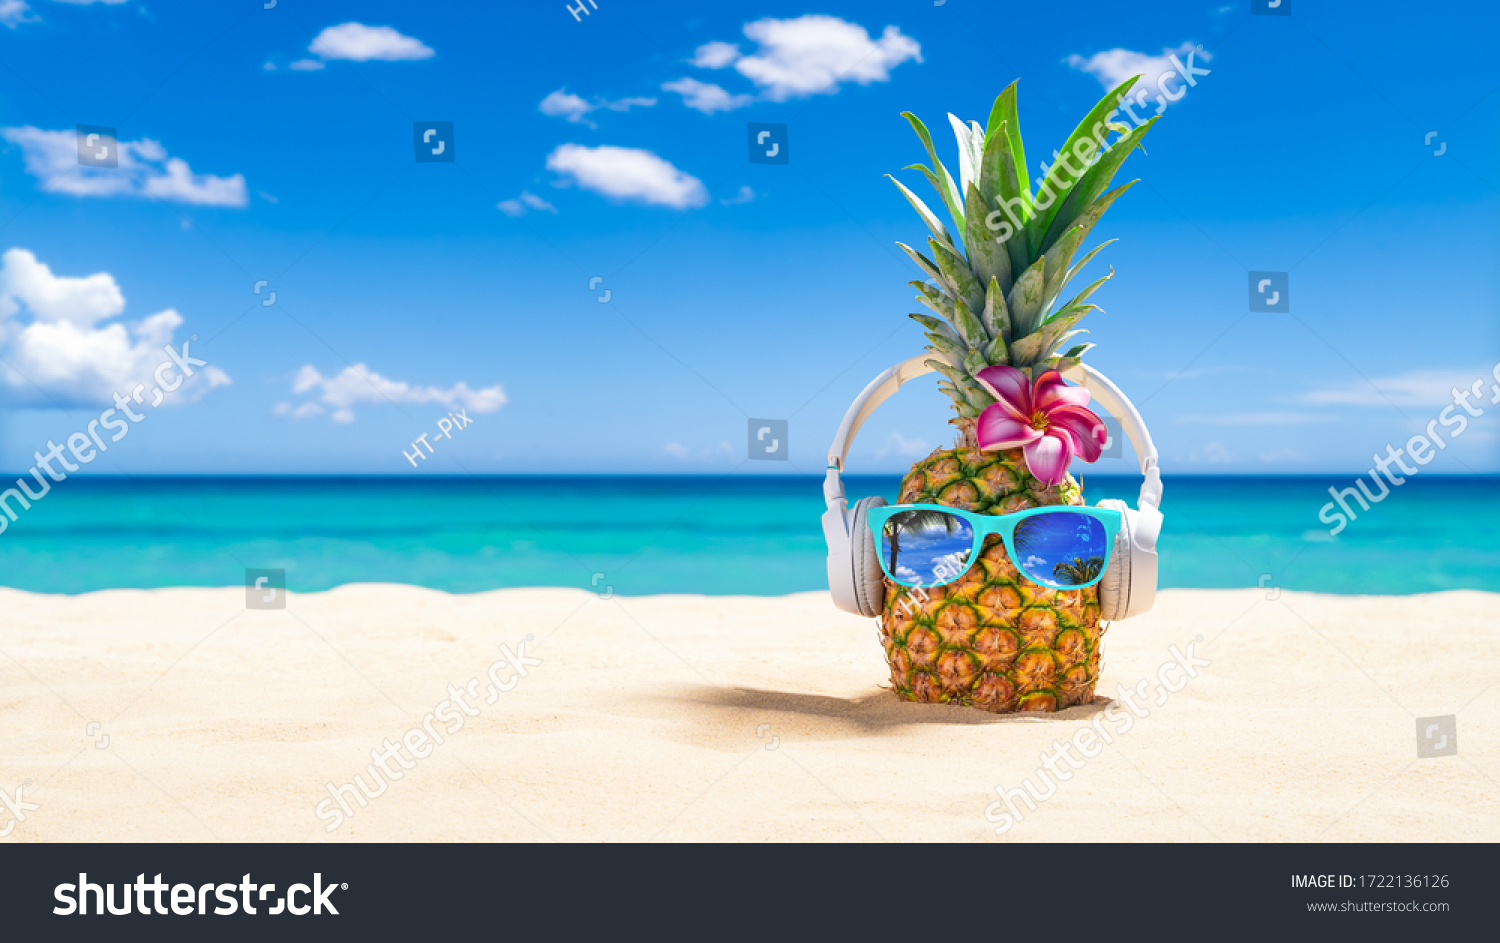 PinePineapple with sunglasses and headphones at tropical beach - Holiday Vacation Concept #1722136126